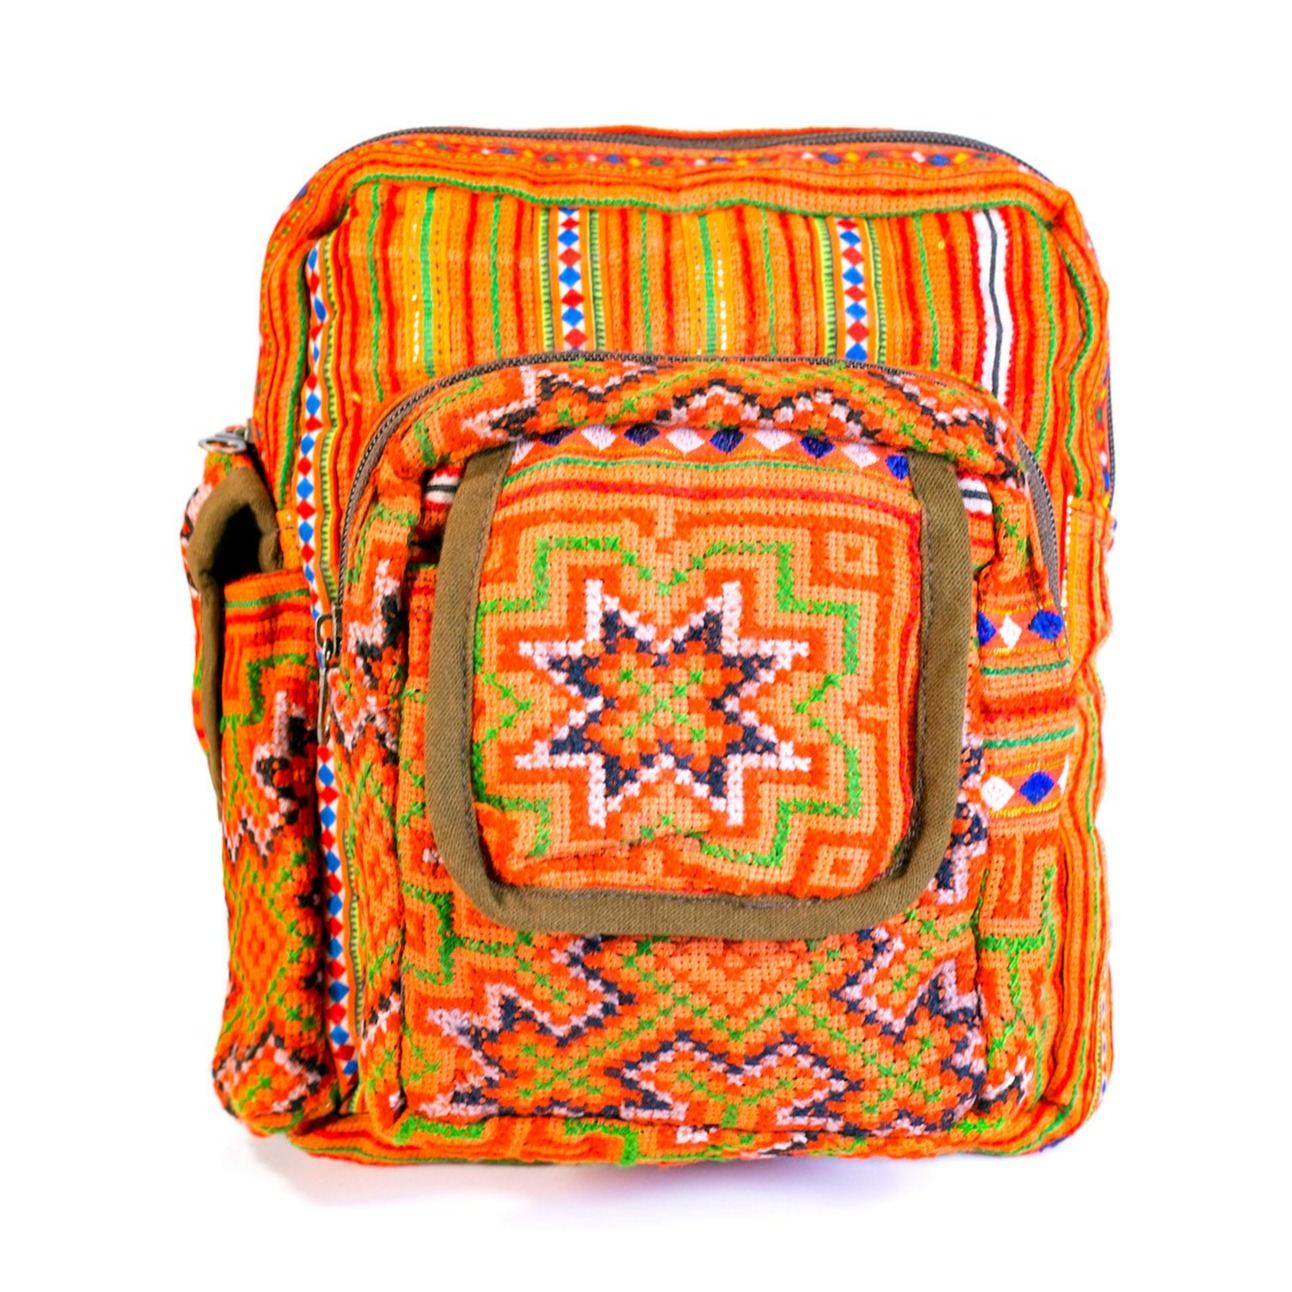 Boho-style linen, embroidery Sling bag, H'mong tribal pattern in ORANGE with brown trim